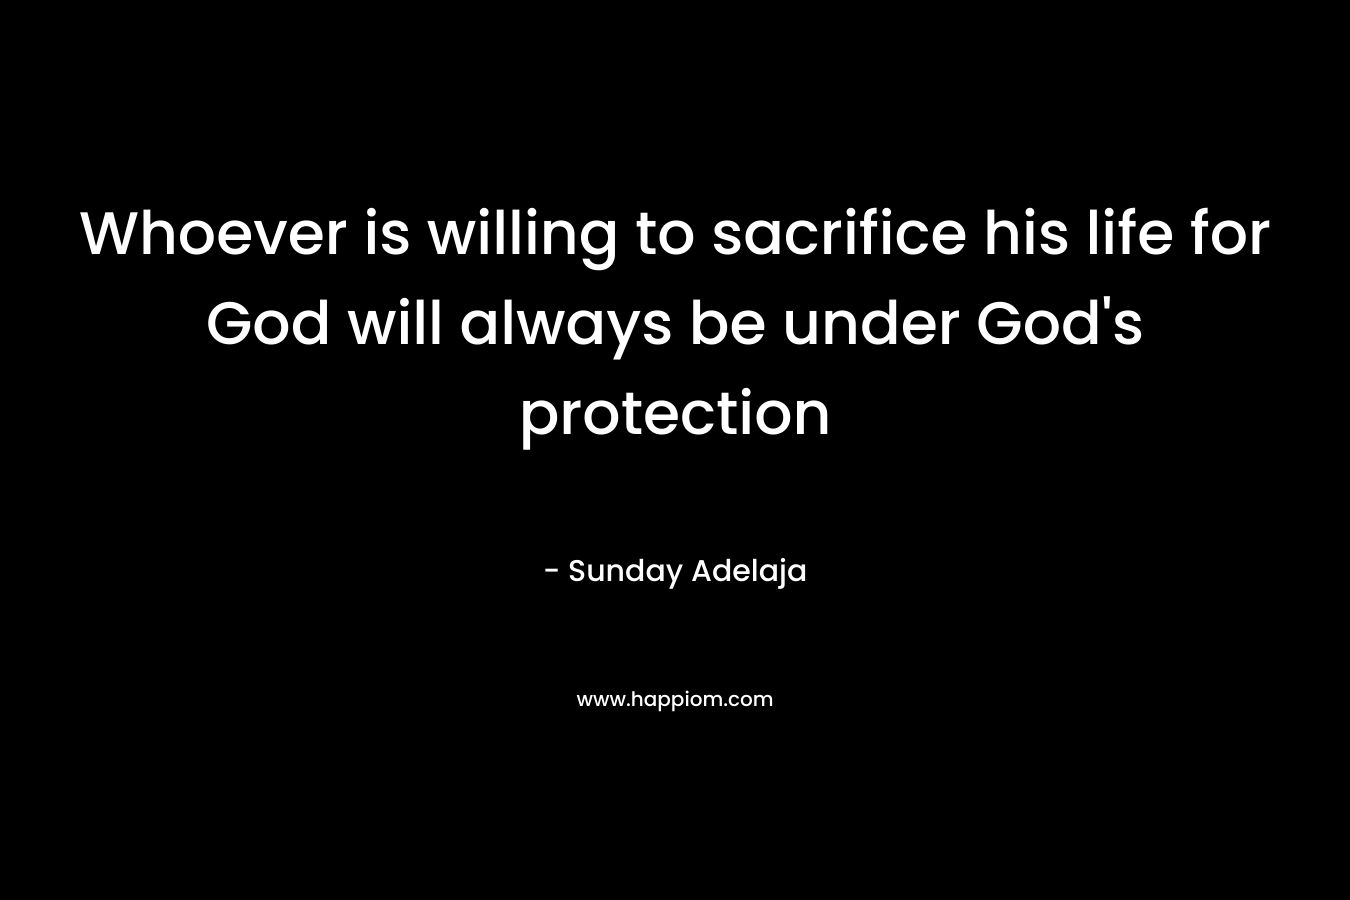 Whoever is willing to sacrifice his life for God will always be under God’s protection – Sunday Adelaja